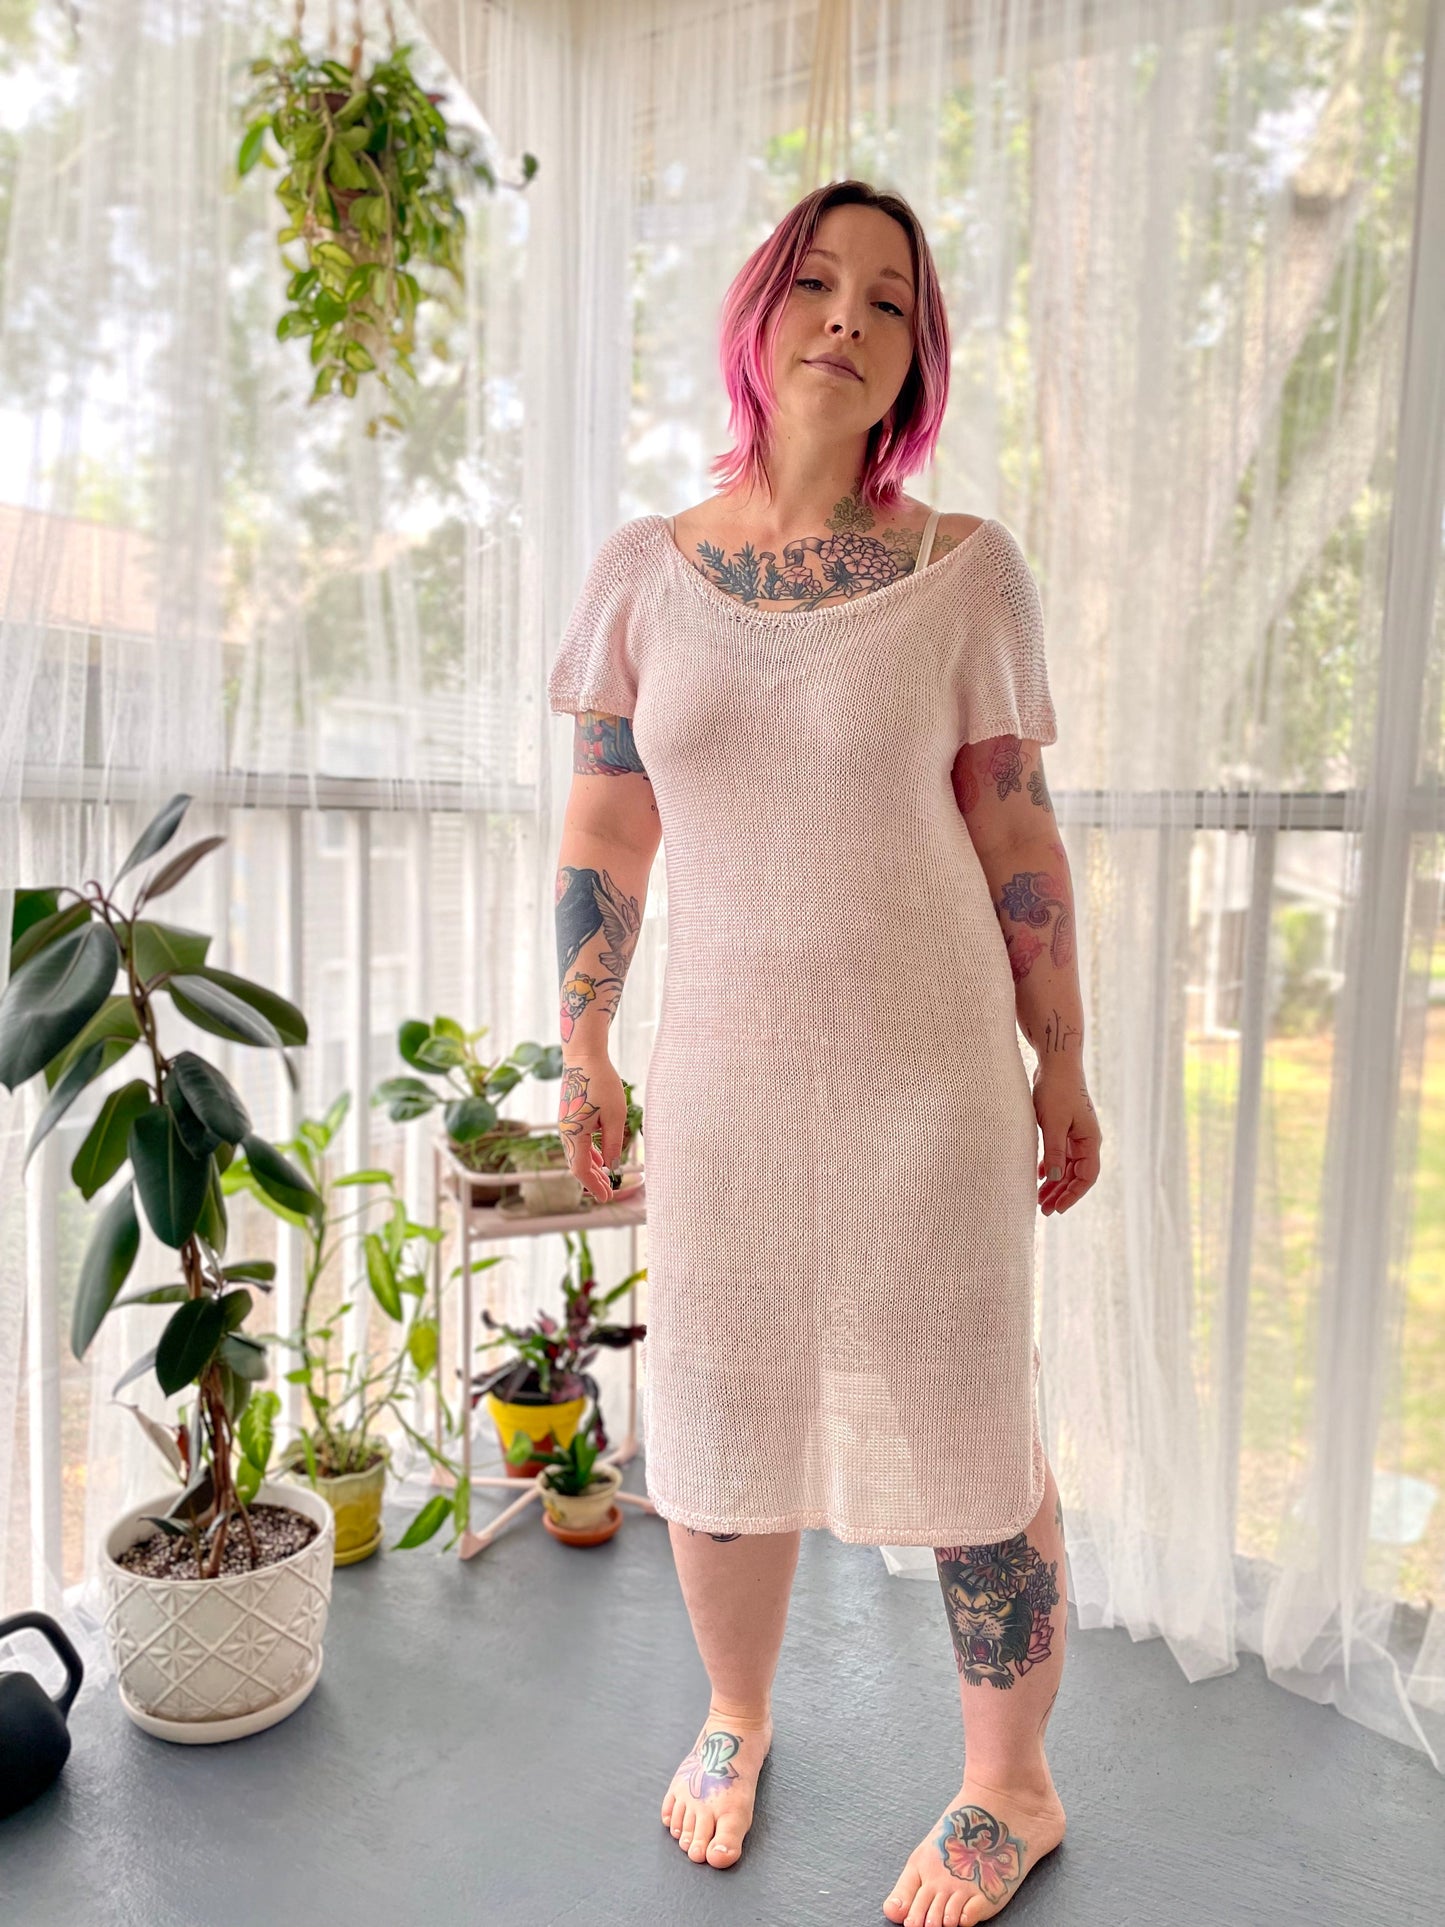 Bess stands in a room, smiling at the camera. She wears a white, hand knit dress with short sleeves.